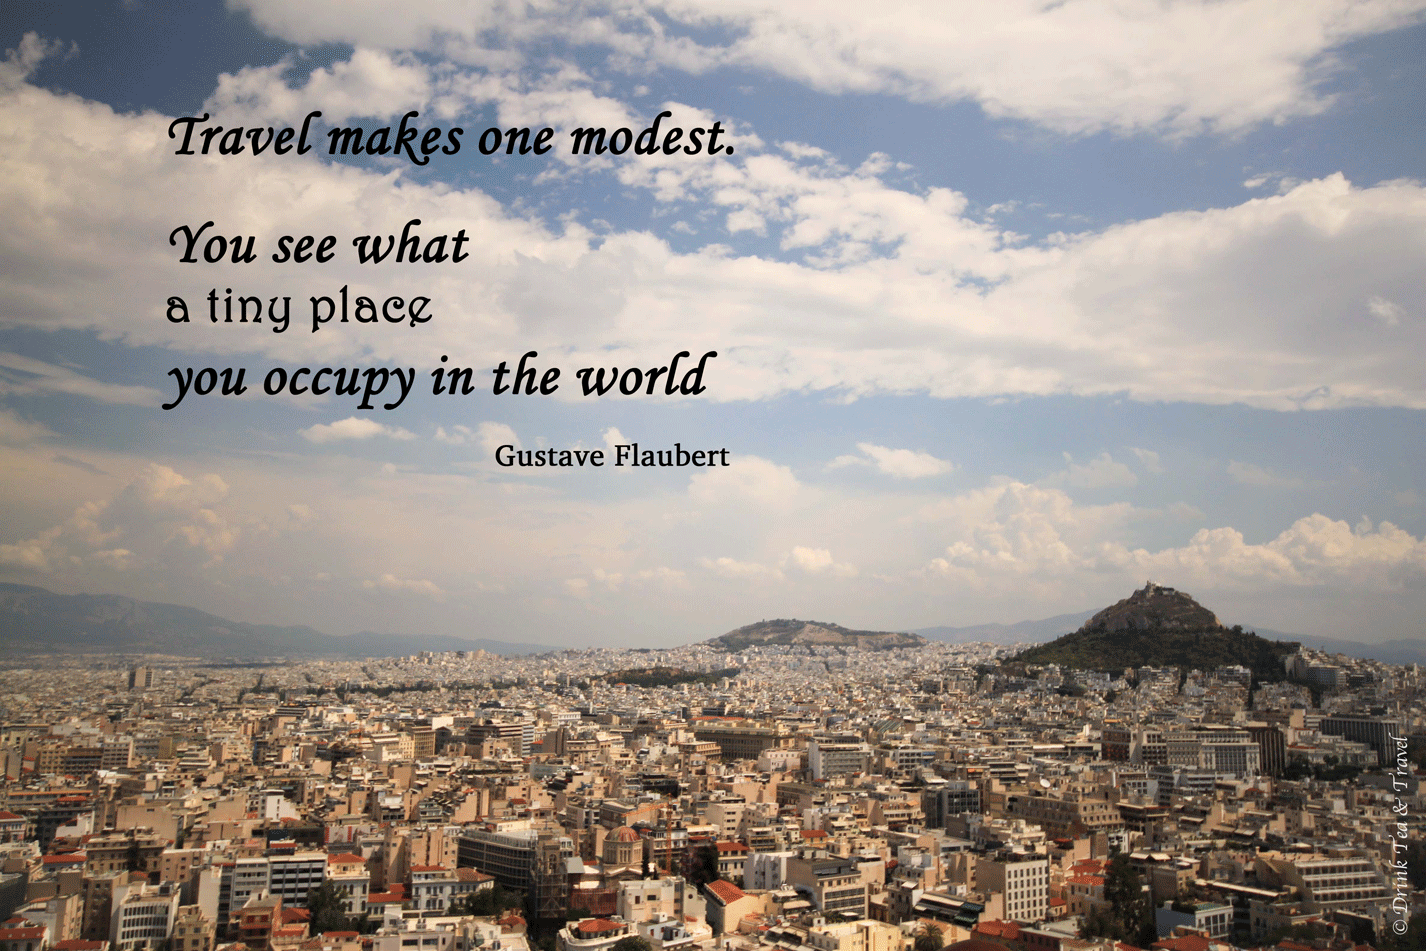 Inspirational Travel Photos: Travel makes one modest. You see what a tiny place you occupy in the world.” — Gustave Flaubert, best travel quotes